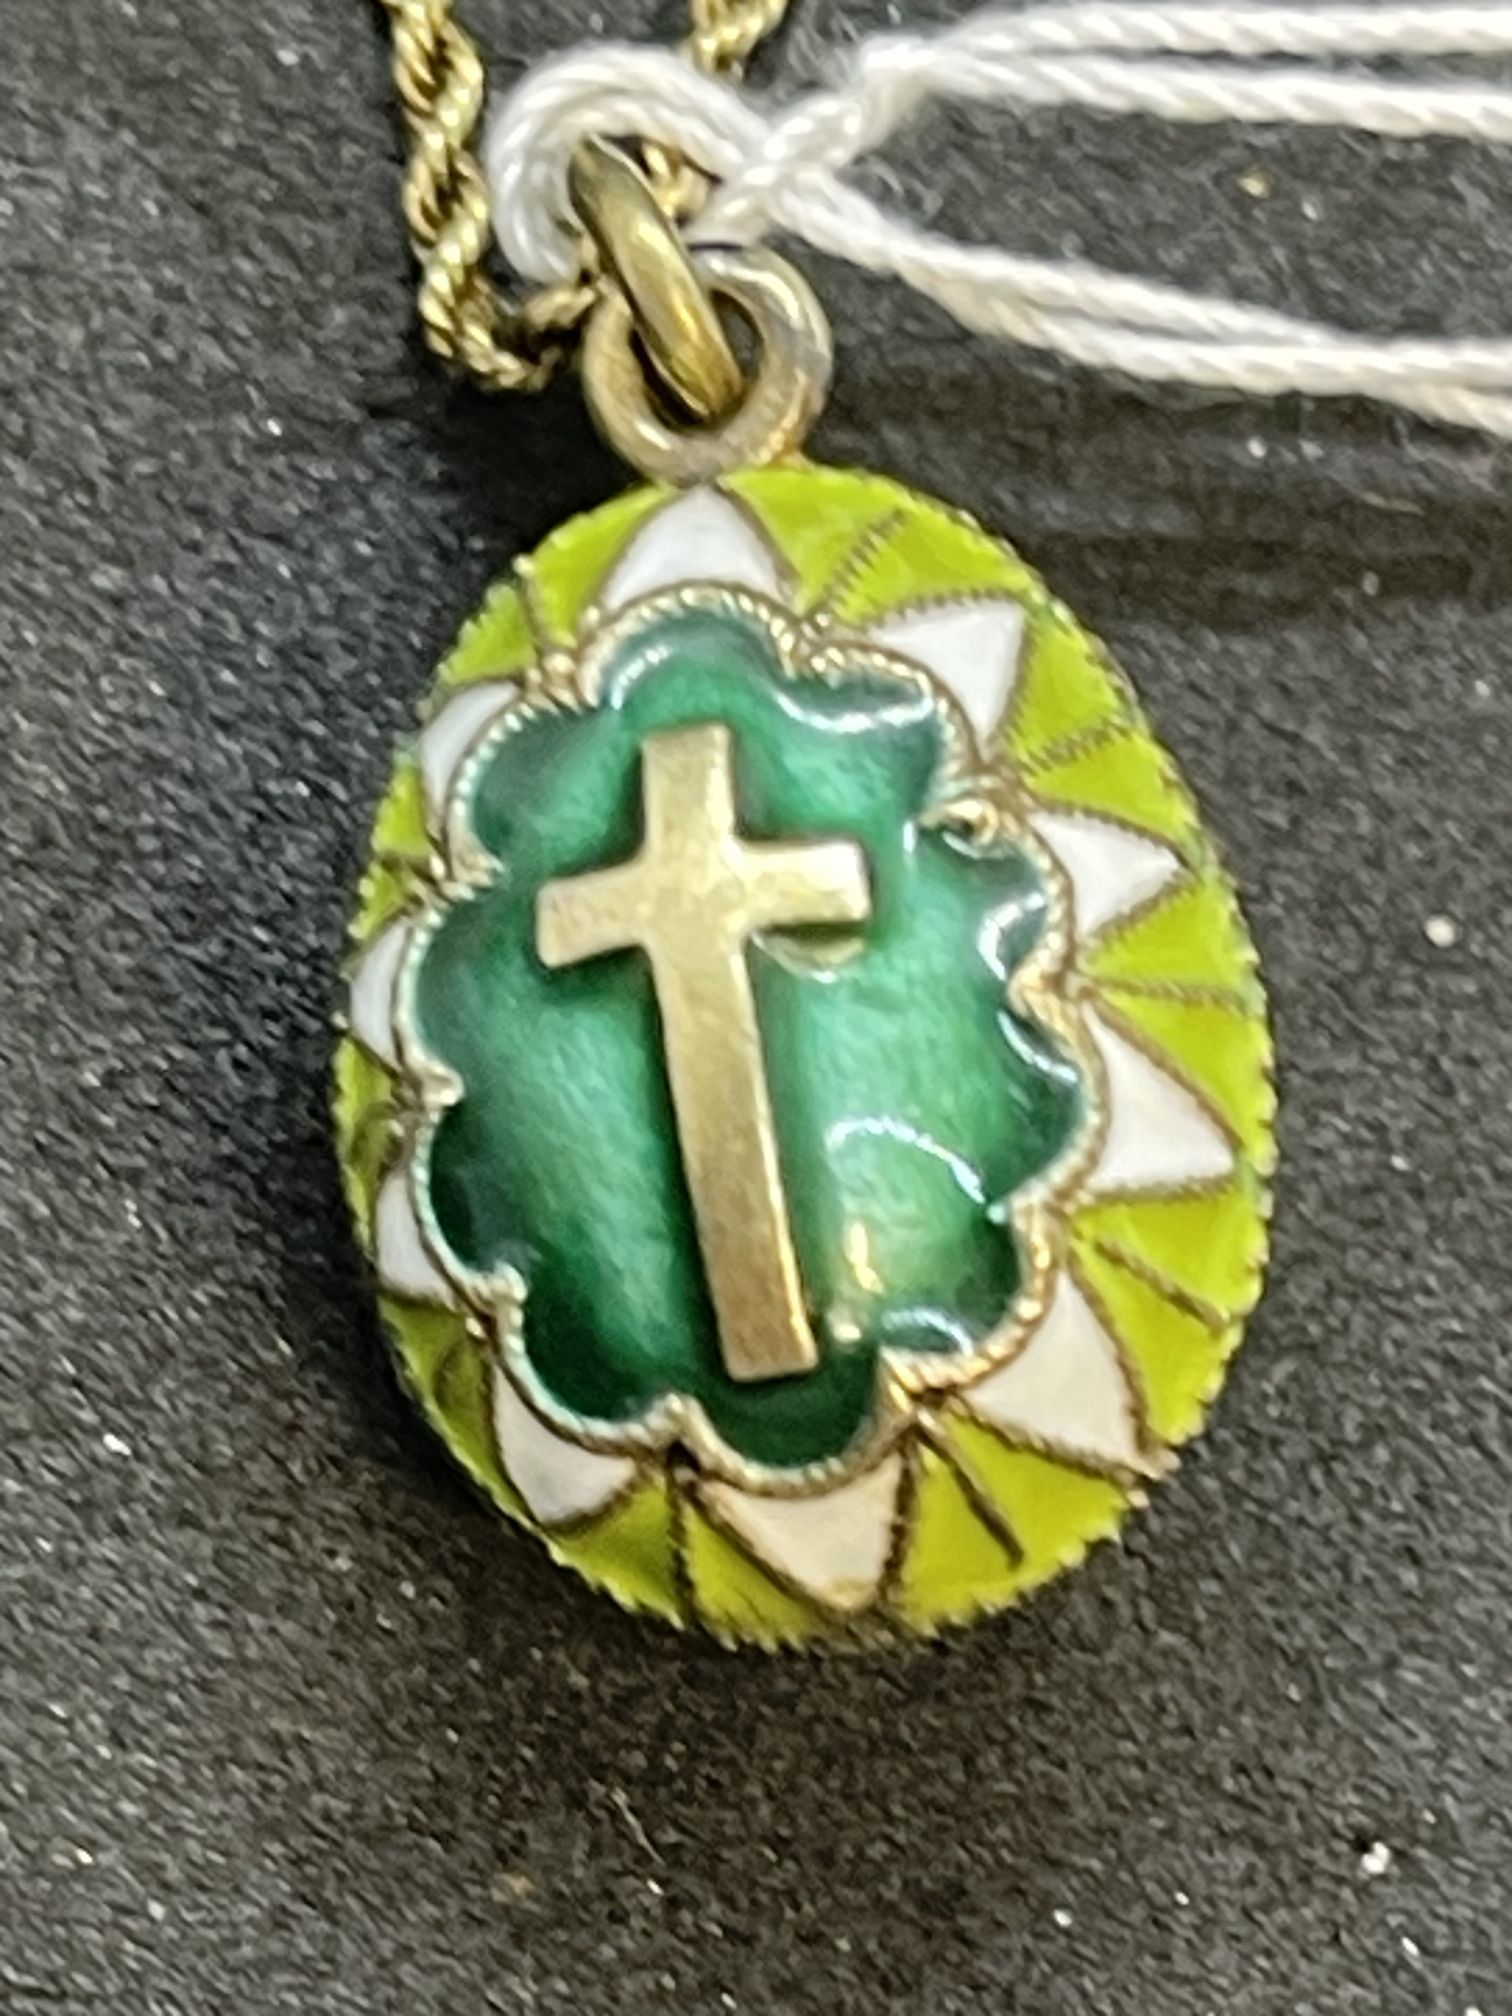 Jewellery: Yellow metal chain (18ins) with a green enamelled egg pendant attached 17.5mm x 14.5mm - Image 2 of 3